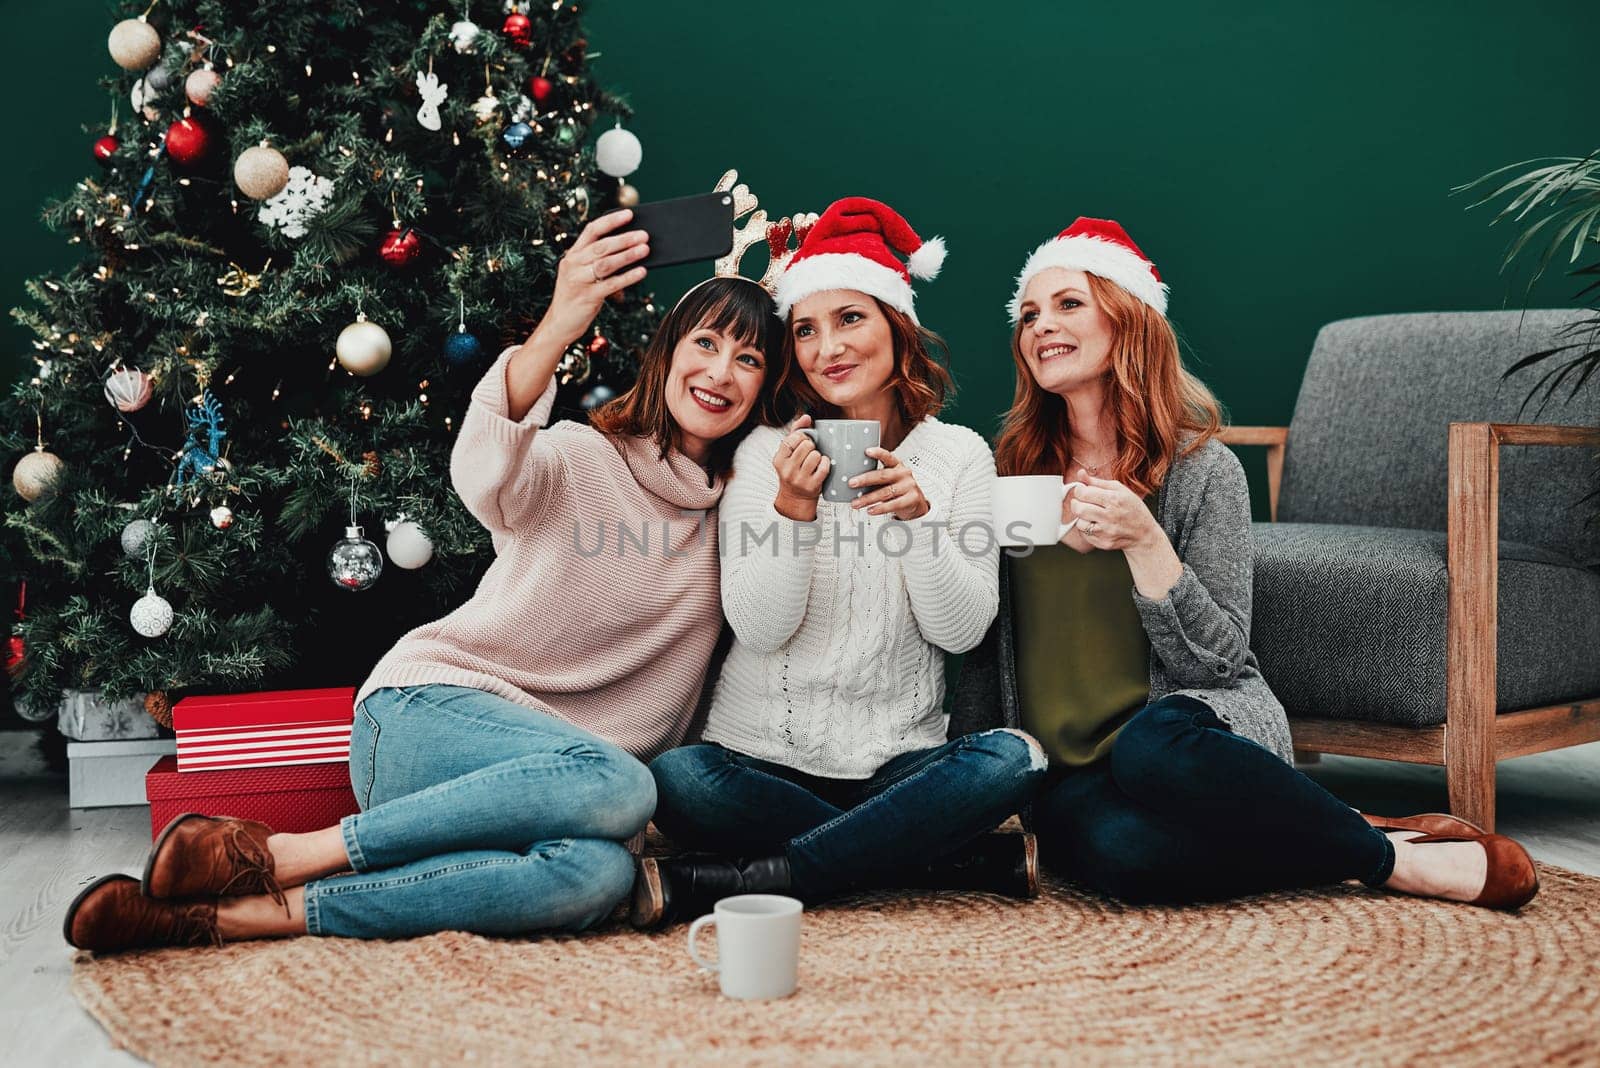 This photo is going to come out great. three attractive middle aged women taking self portraits together with a cellphone at home during Christmas time